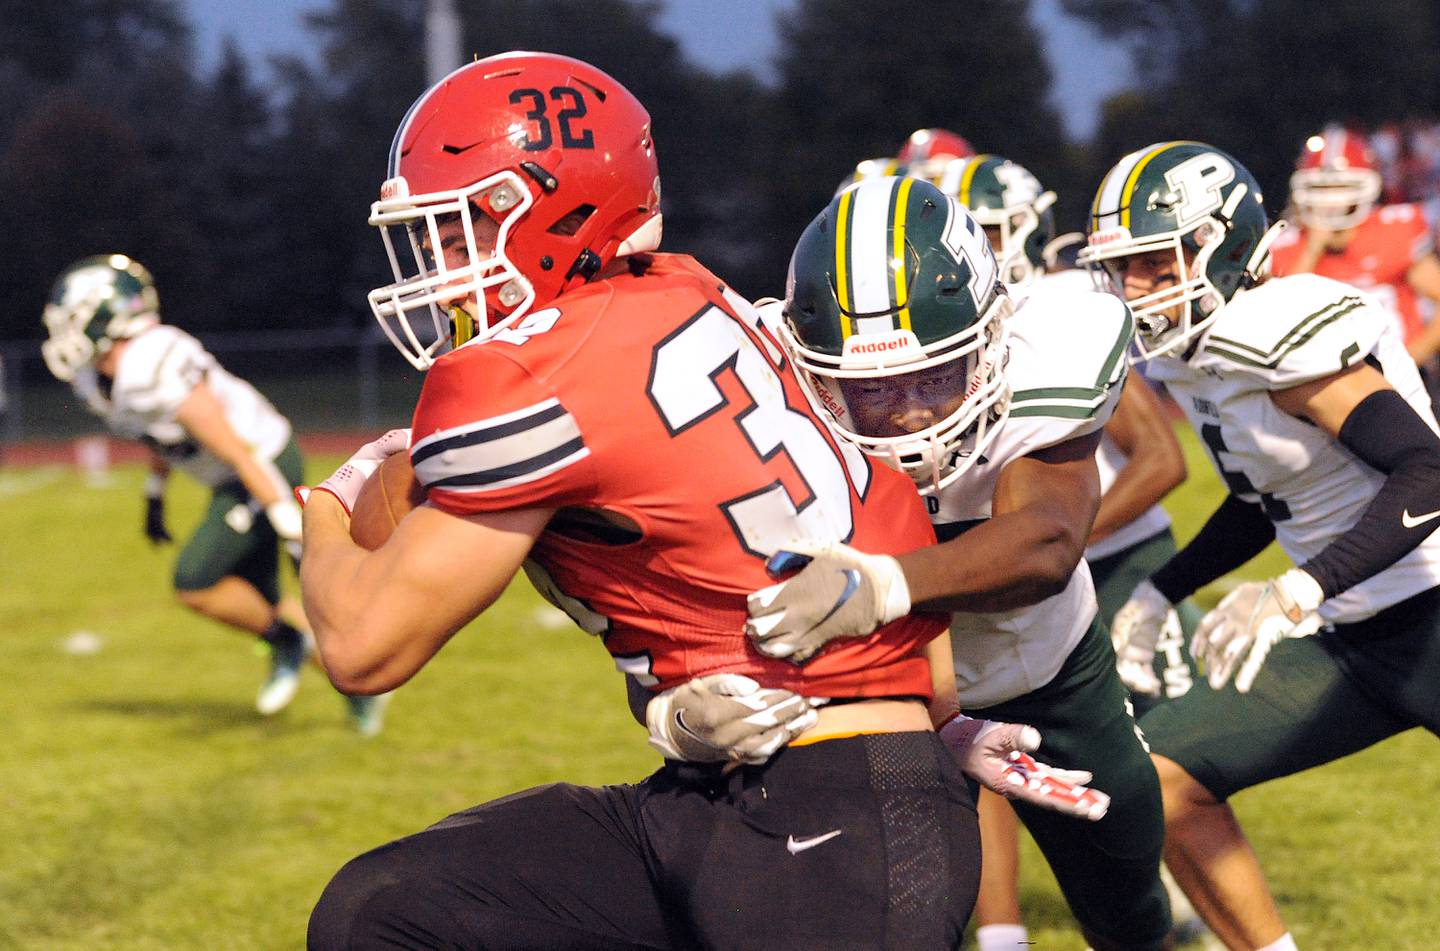 Yorkville running back Gio Zeman powers along the sideline against Plainfield Central defender Quenton Howard during a varsity football game at Yorkville High School on Friday, Sep. 2, 2022.